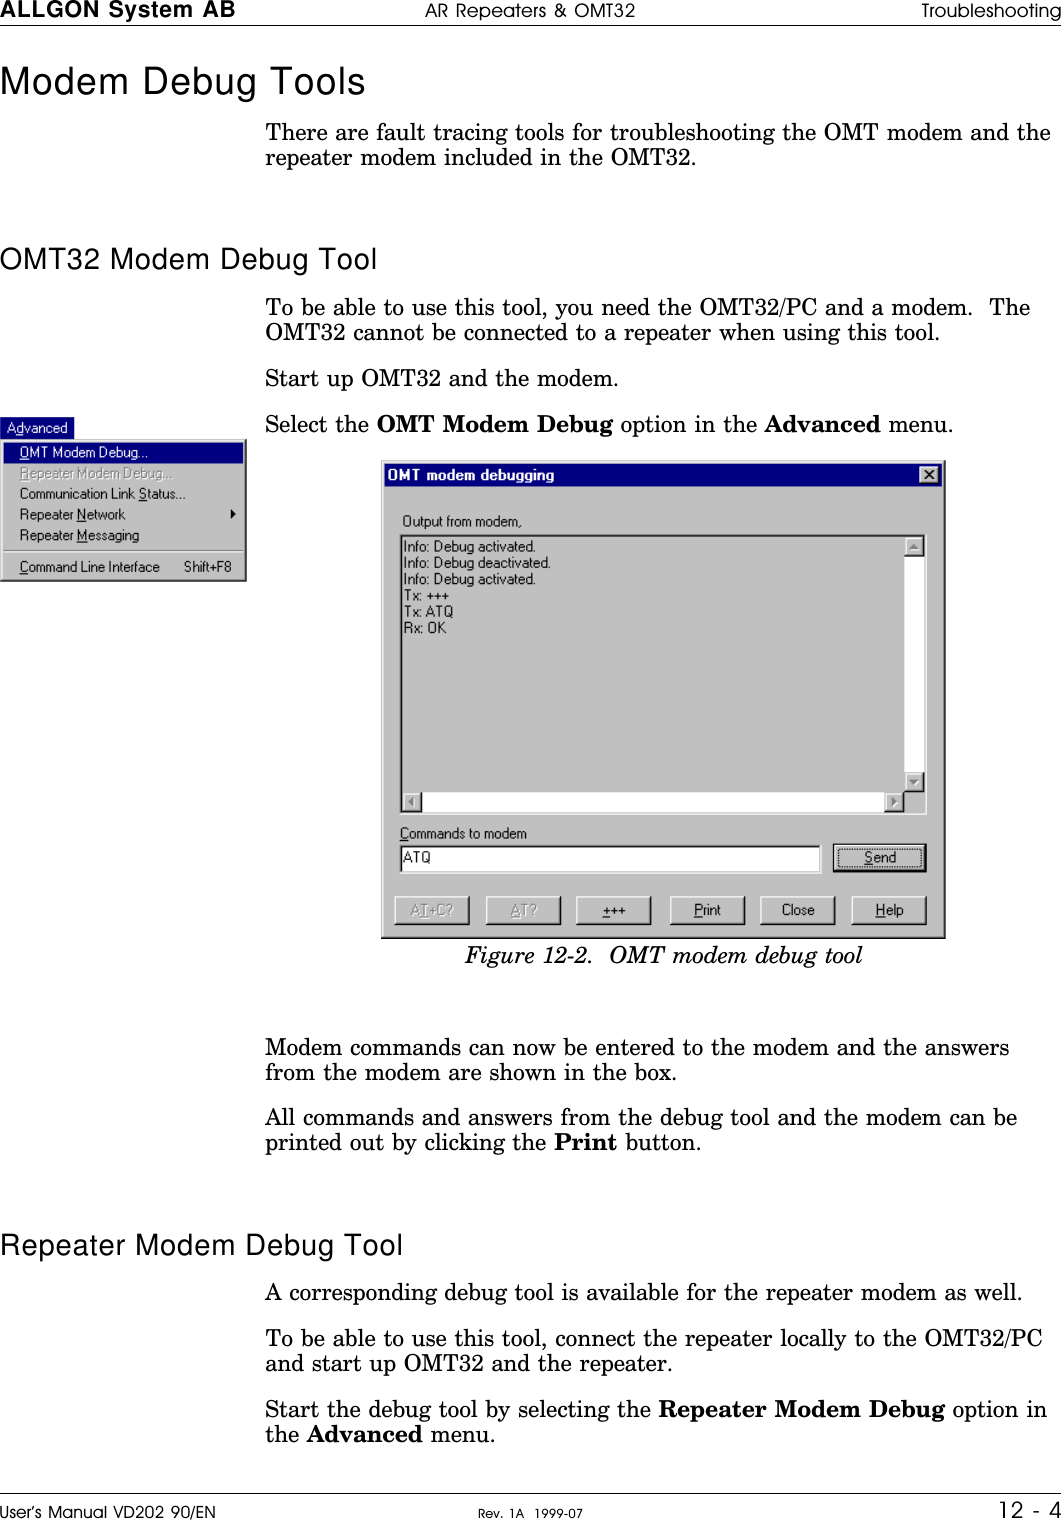 Modem Debug Tools There are fault tracing tools for troubleshooting the OMT modem and therepeater modem included in the OMT32.OMT32 Modem Debug ToolTo be able to use this tool, you need the OMT32/PC and a modem.  TheOMT32 cannot be connected to a repeater when using this tool.Start up OMT32 and the modem.Select the OMT Modem Debug option in the Advanced menu.Modem commands can now be entered to the modem and the answersfrom the modem are shown in the box.All commands and answers from the debug tool and the modem can beprinted out by clicking the Print button.Repeater Modem Debug ToolA corresponding debug tool is available for the repeater modem as well.To be able to use this tool, connect the repeater locally to the OMT32/PCand start up OMT32 and the repeater.Start the debug tool by selecting the Repeater Modem Debug option inthe Advanced menu.Figure 12-2.  OMT modem debug toolALLGON System AB AR Repeaters &amp; OMT32 TroubleshootingUser’s Manual VD202 90/EN Rev. 1A  1999-07 12 - 4